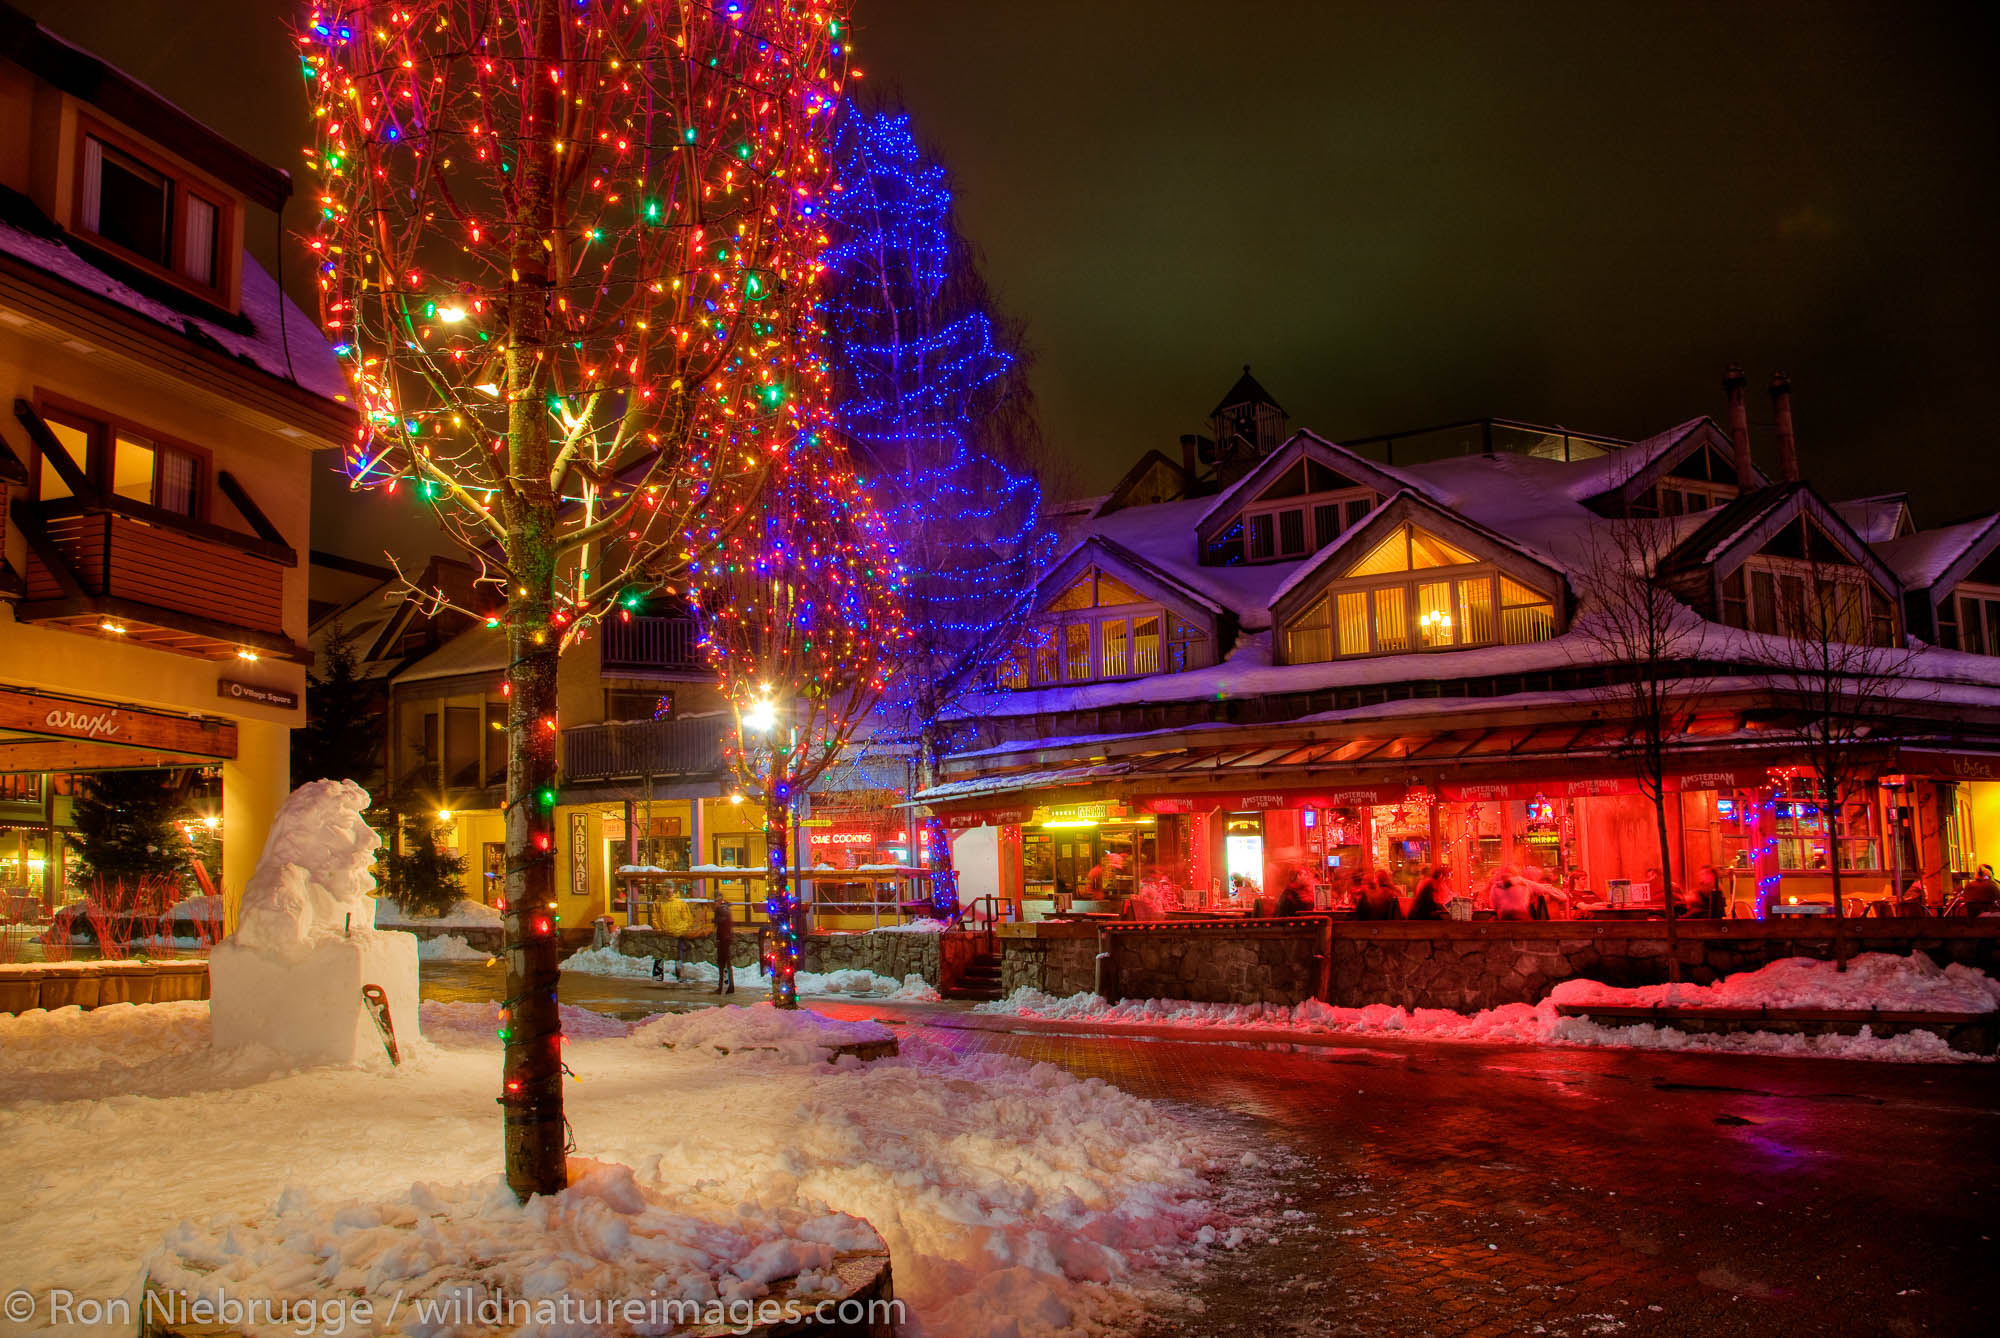 The town of Whistler, one of the host venues for the 2010 Vancouver Winter Olympics, British Columbia, Canada.